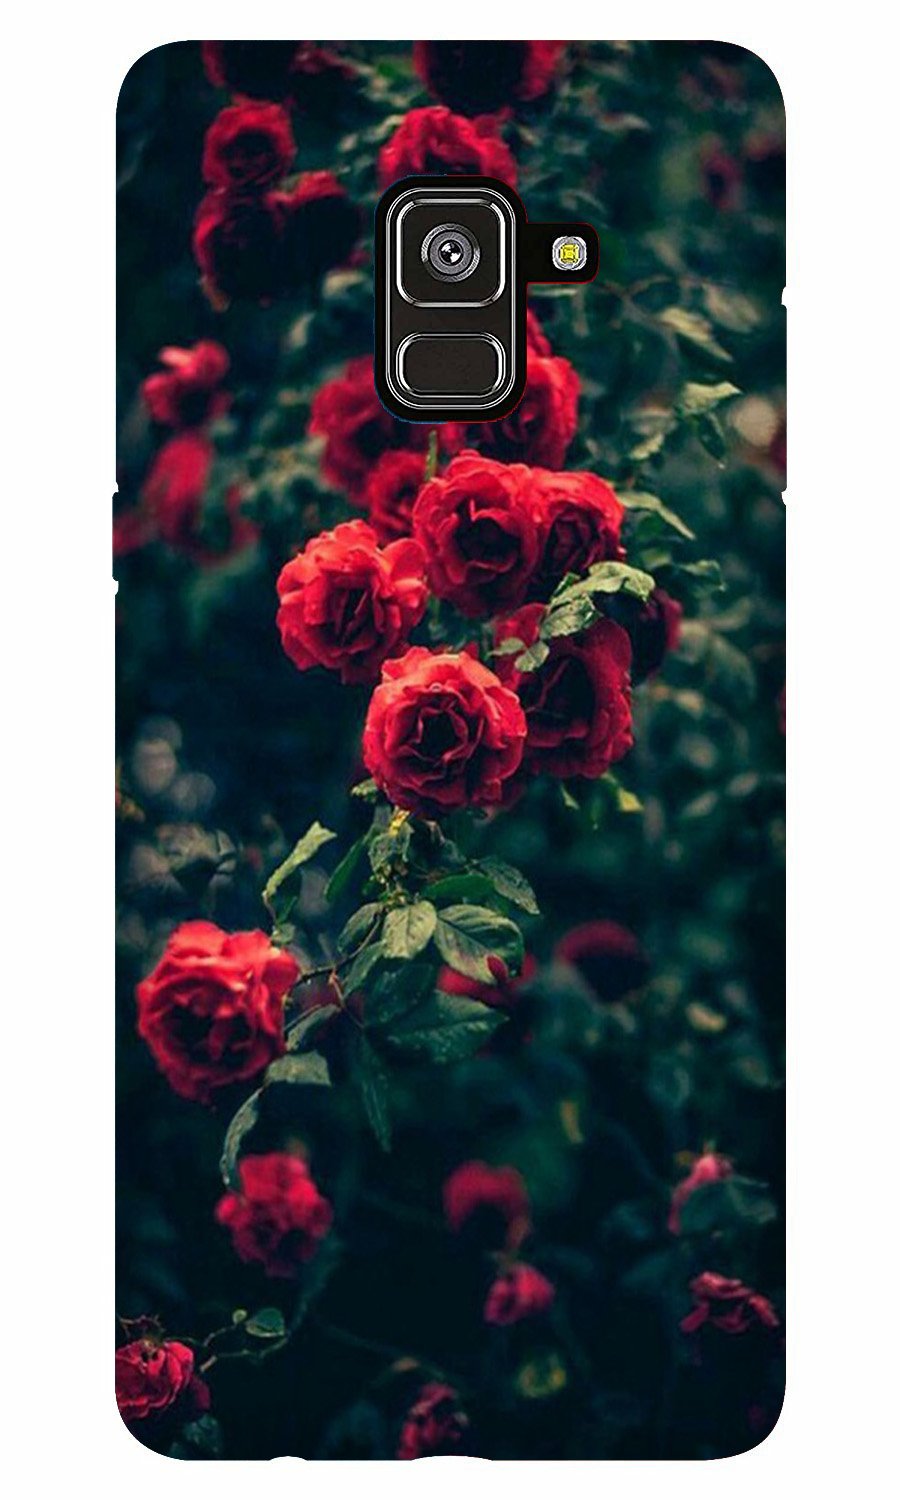 Red Rose Case for Galaxy A8 Plus